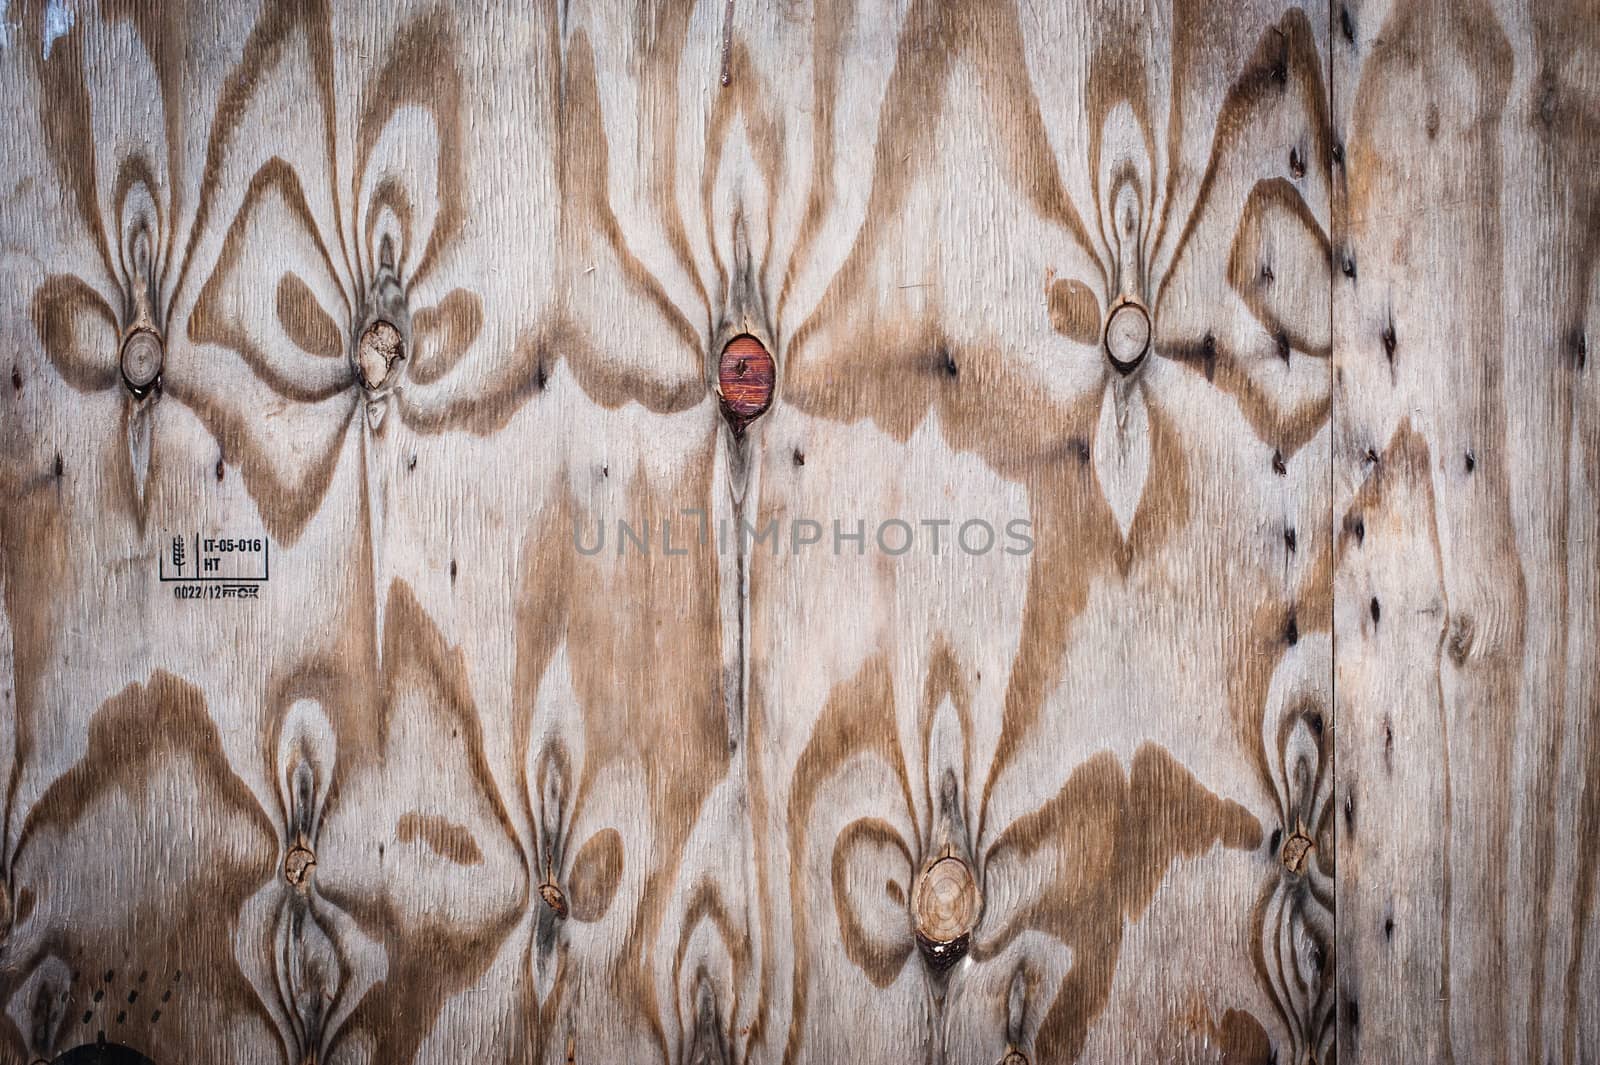 Wooden board textured surface with small details